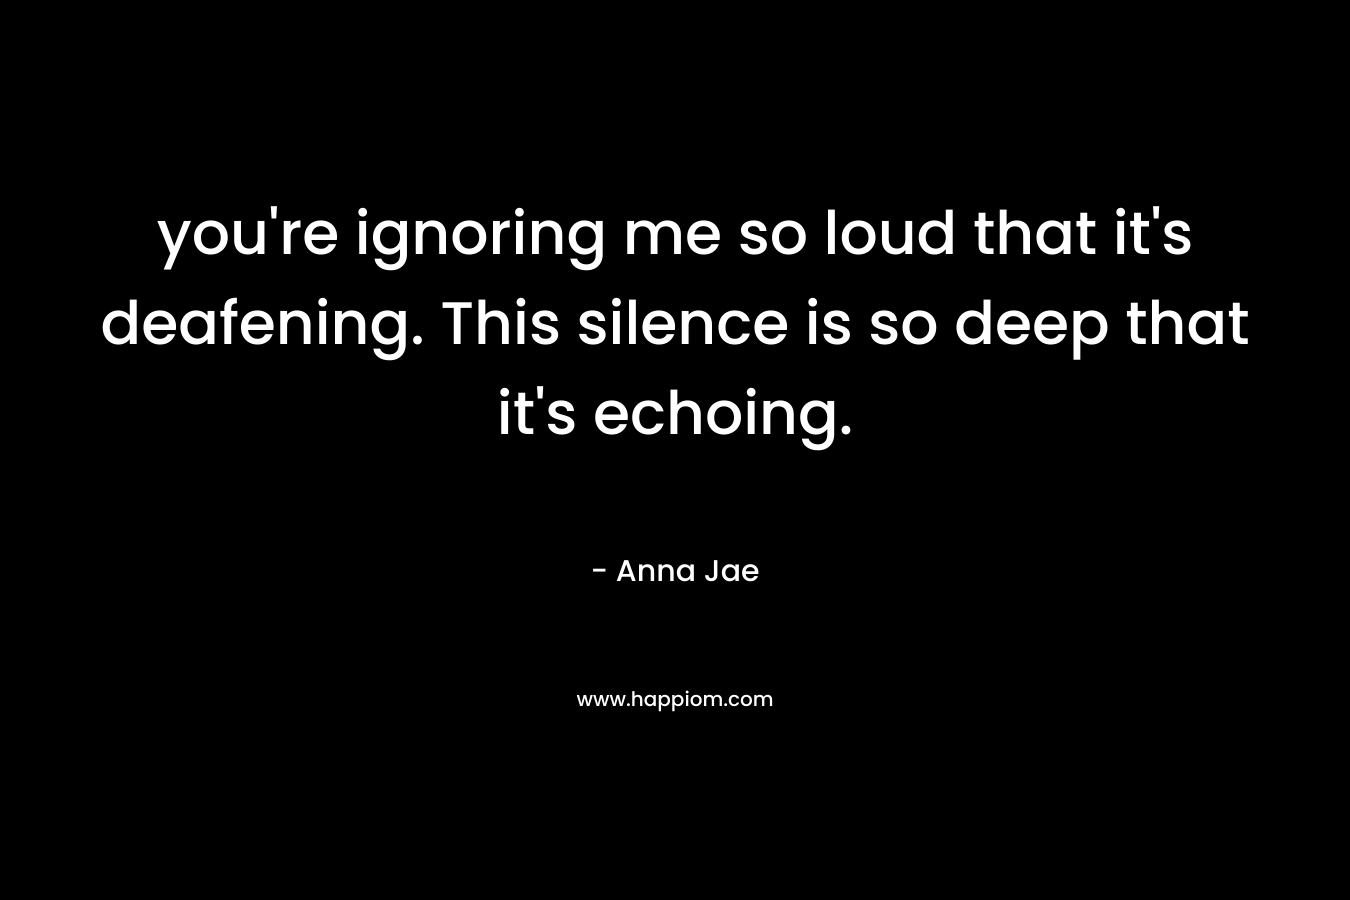 you're ignoring me so loud that it's deafening. This silence is so deep that it's echoing.